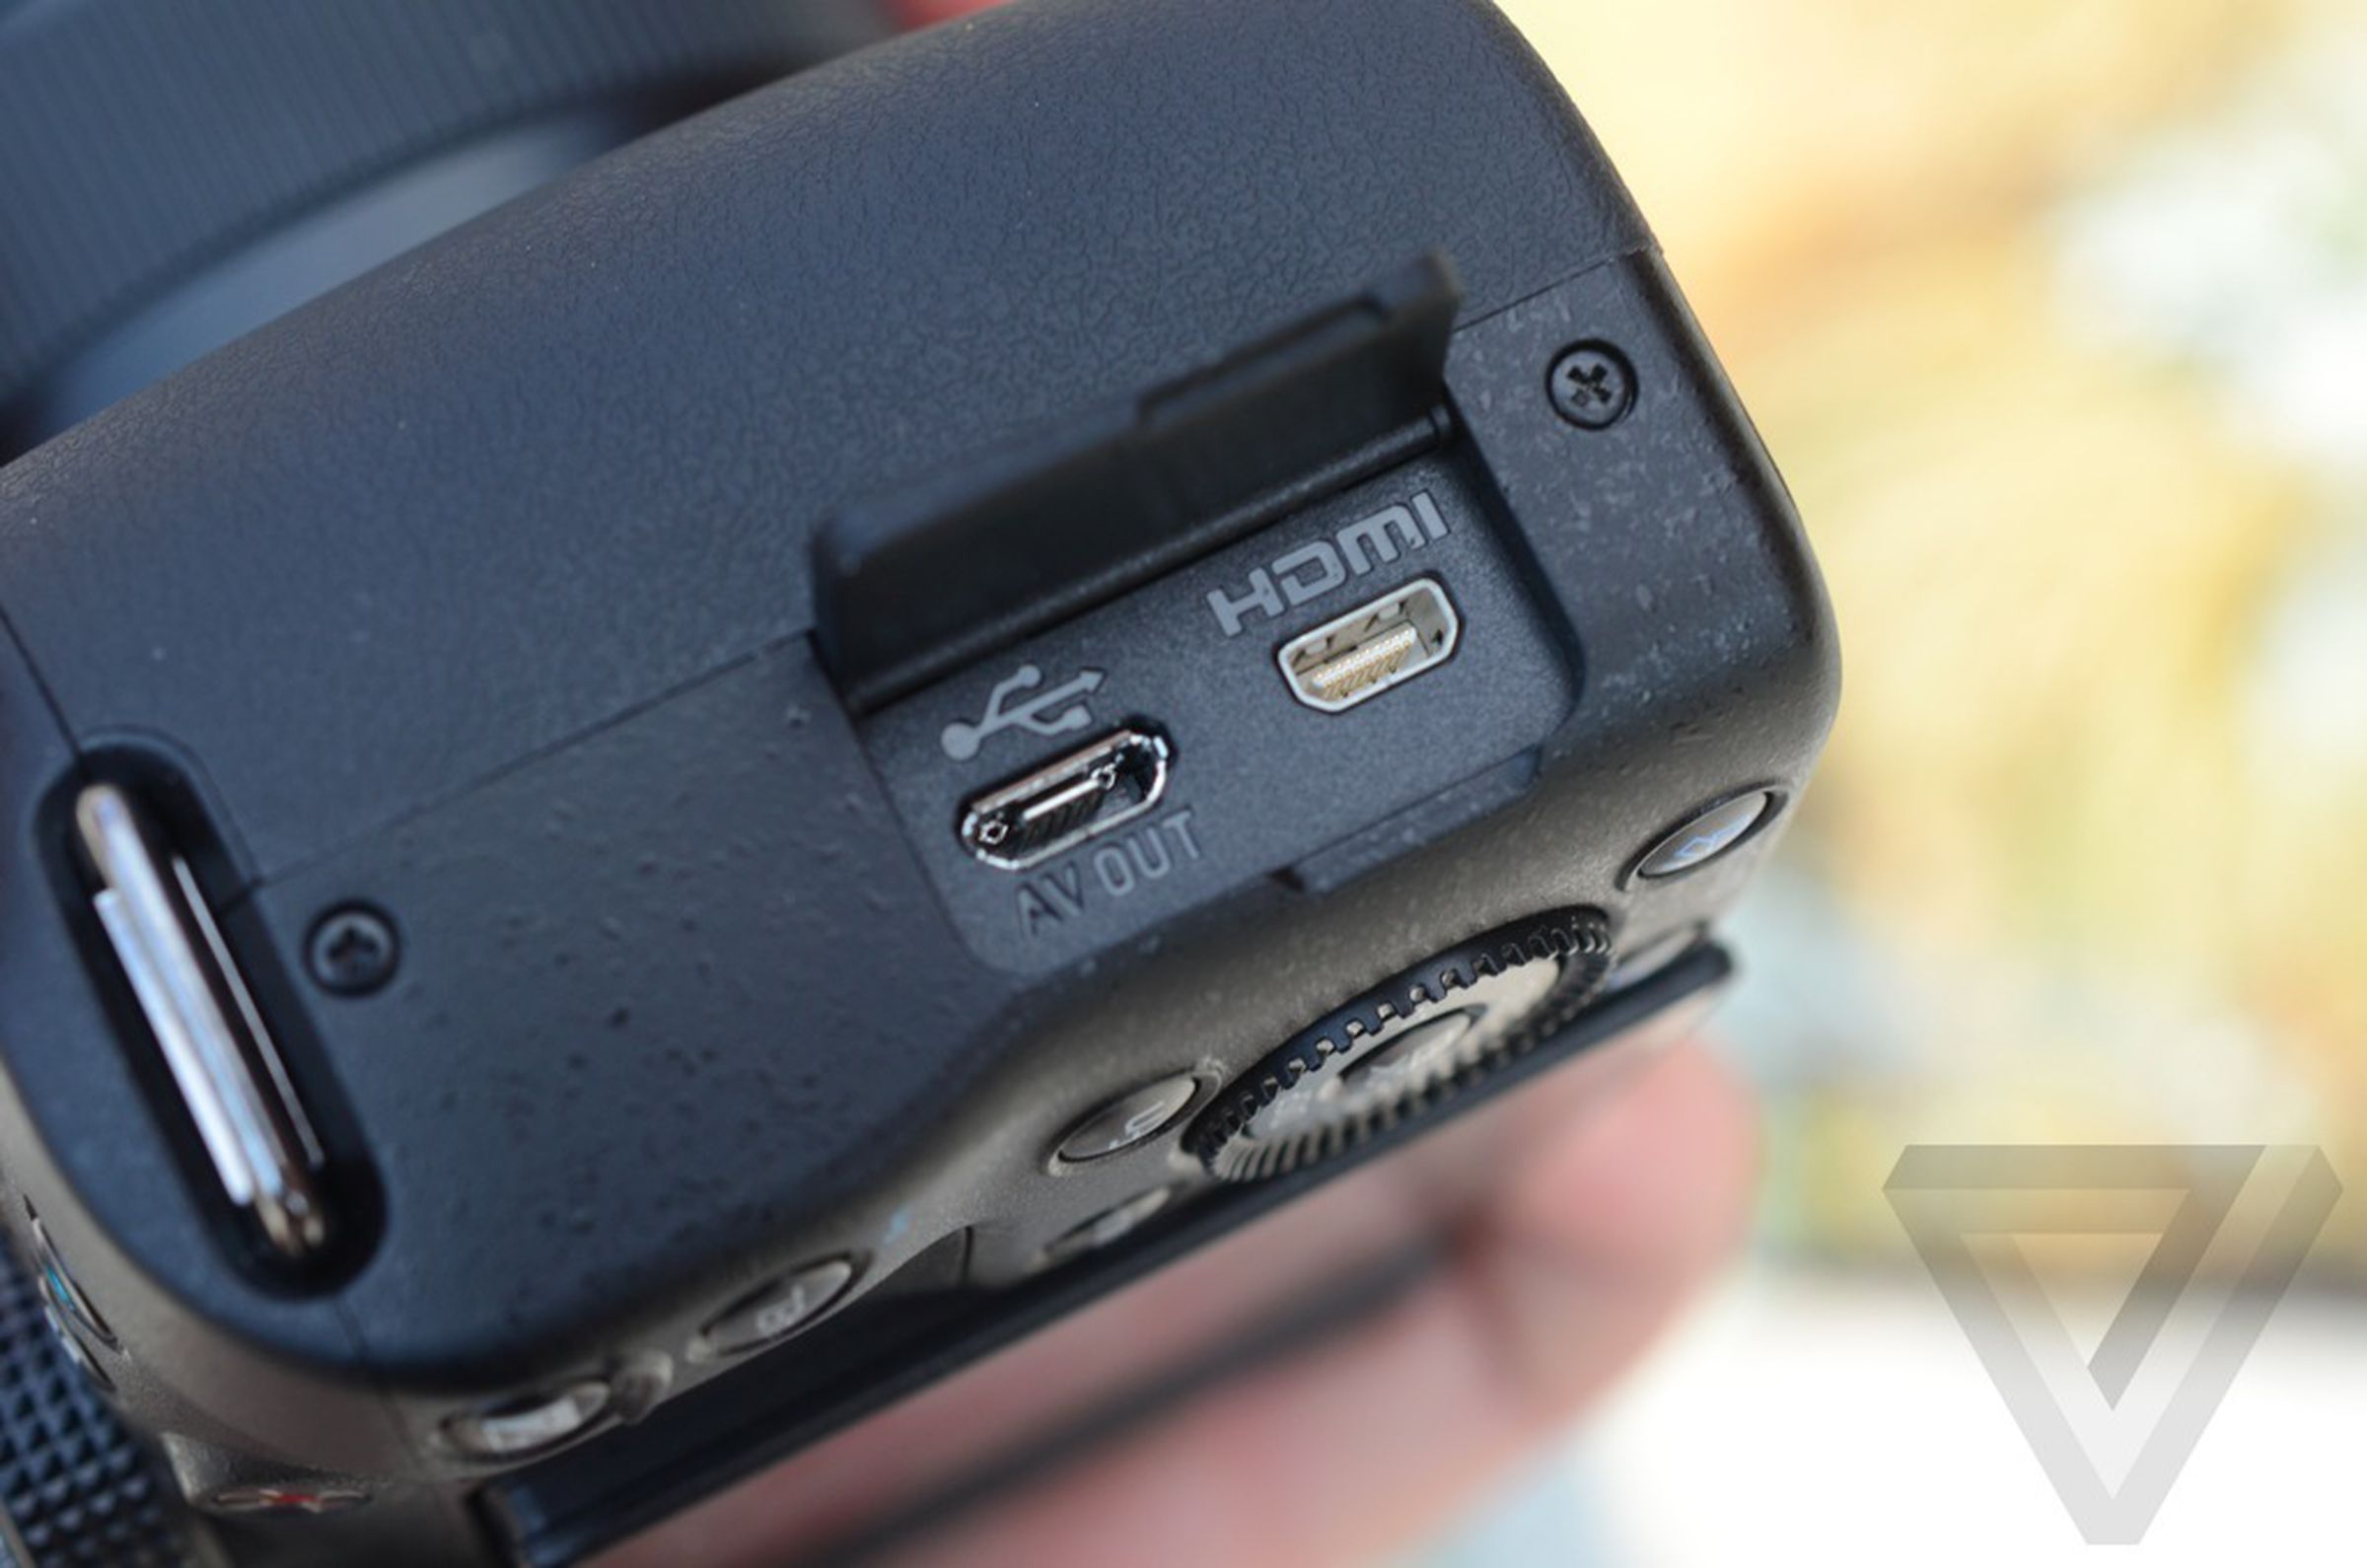 Samsung NX20 review pictures